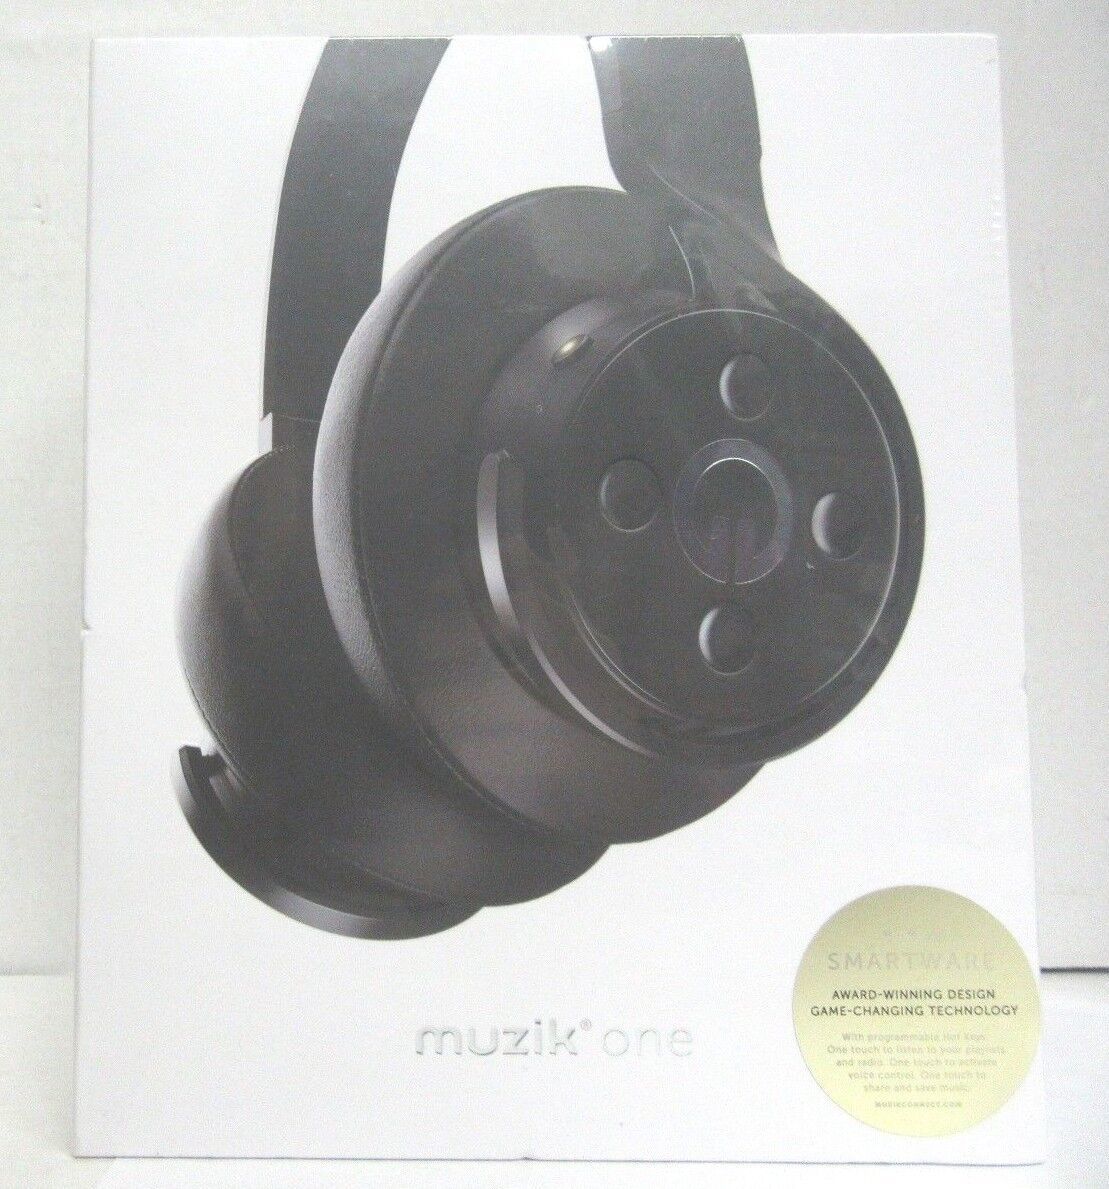 Primary image for Muzik One Connect Wireless Smartware Over-the-Ear Headphones - Black